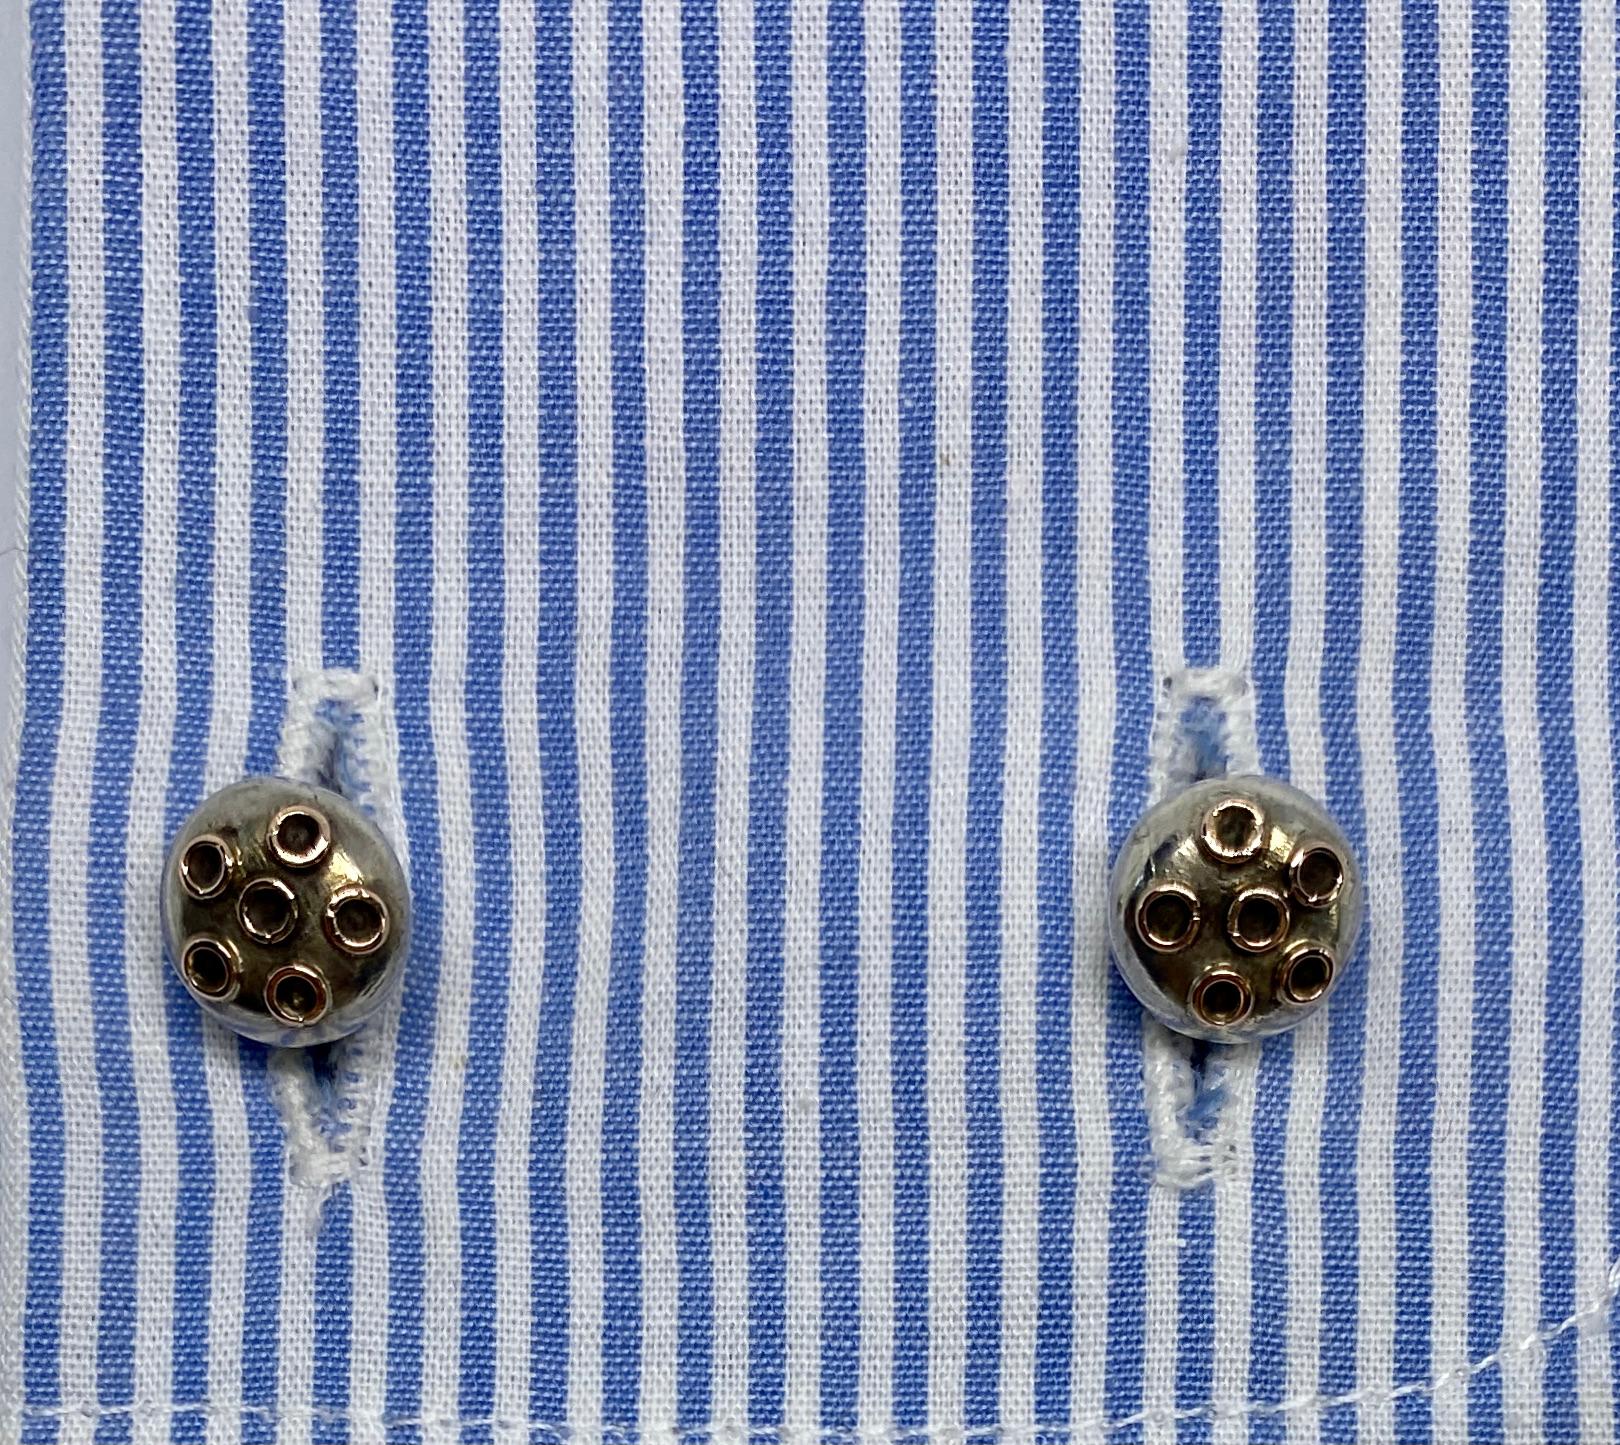 Antique Arts & Crafts Cufflinks in Sterling and Yellow Gold by George Shiebler 1